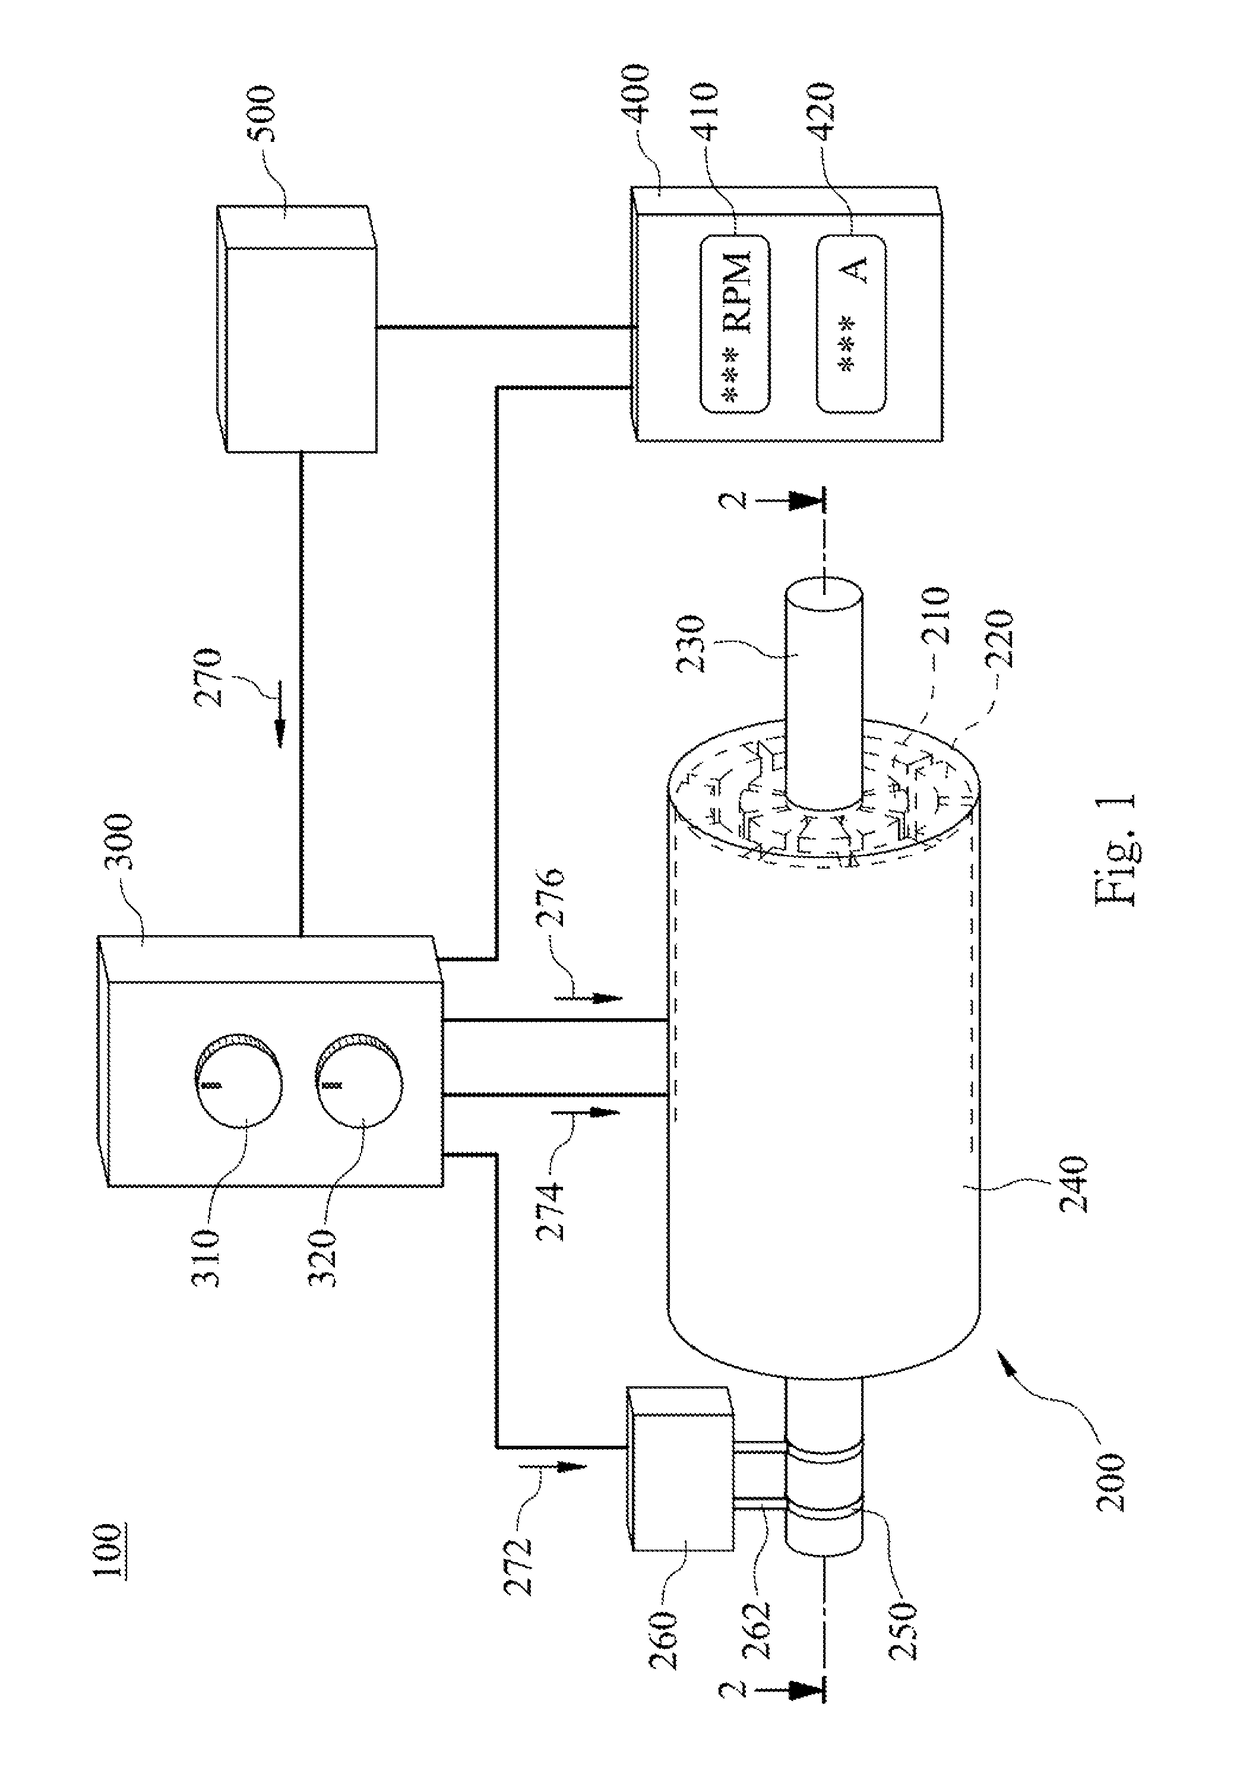 Motor speed control system and method thereof